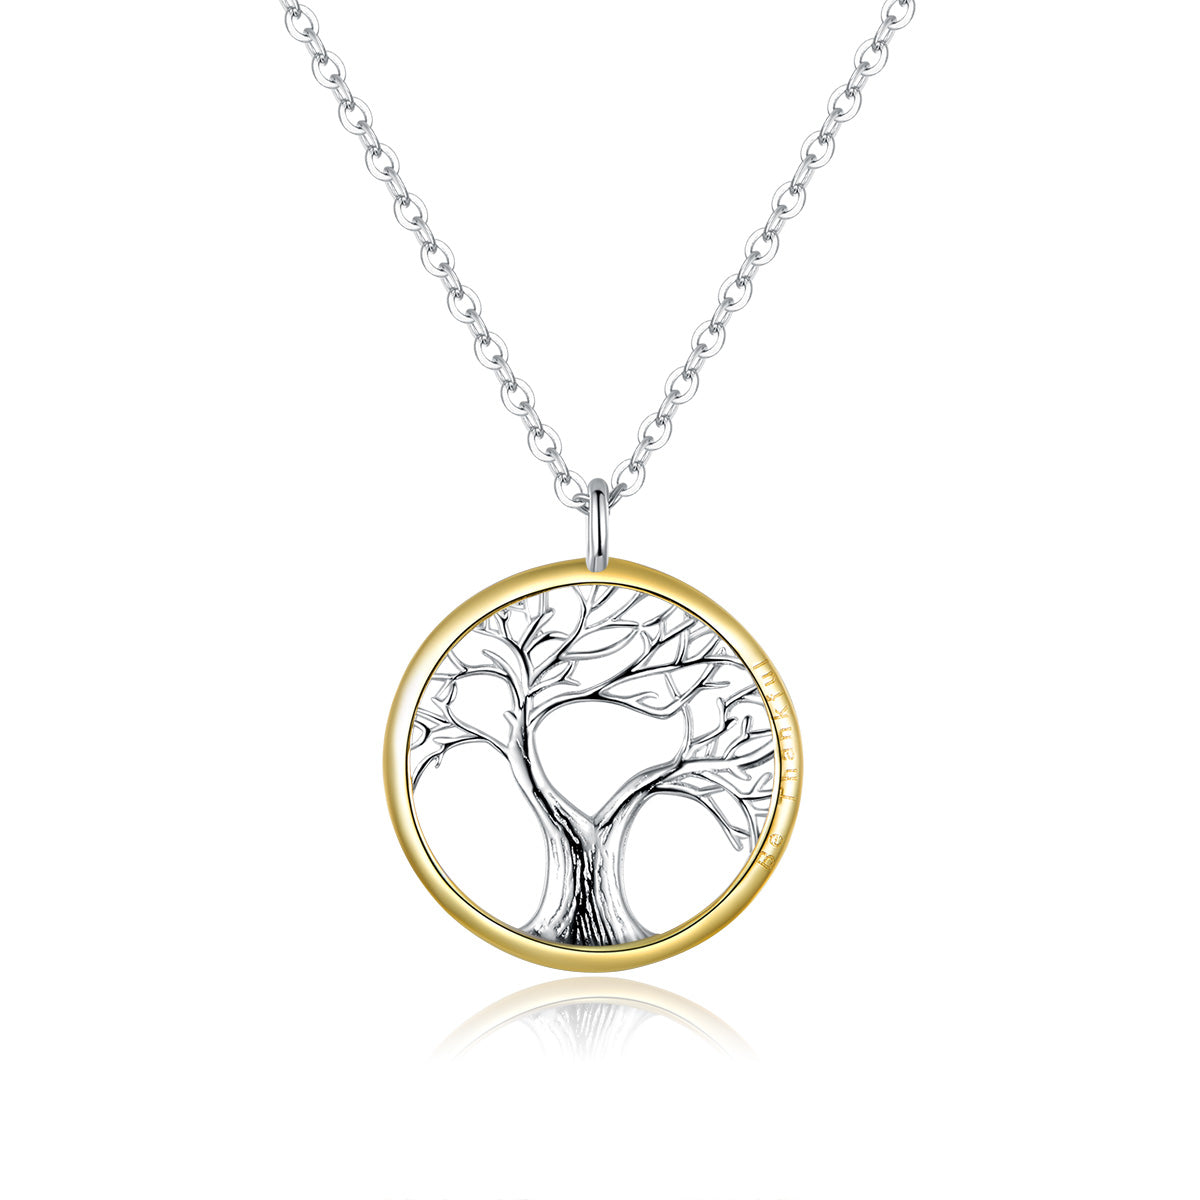 Tree of Life Pendant on Chain - Sterling Silver 925 - NEW622